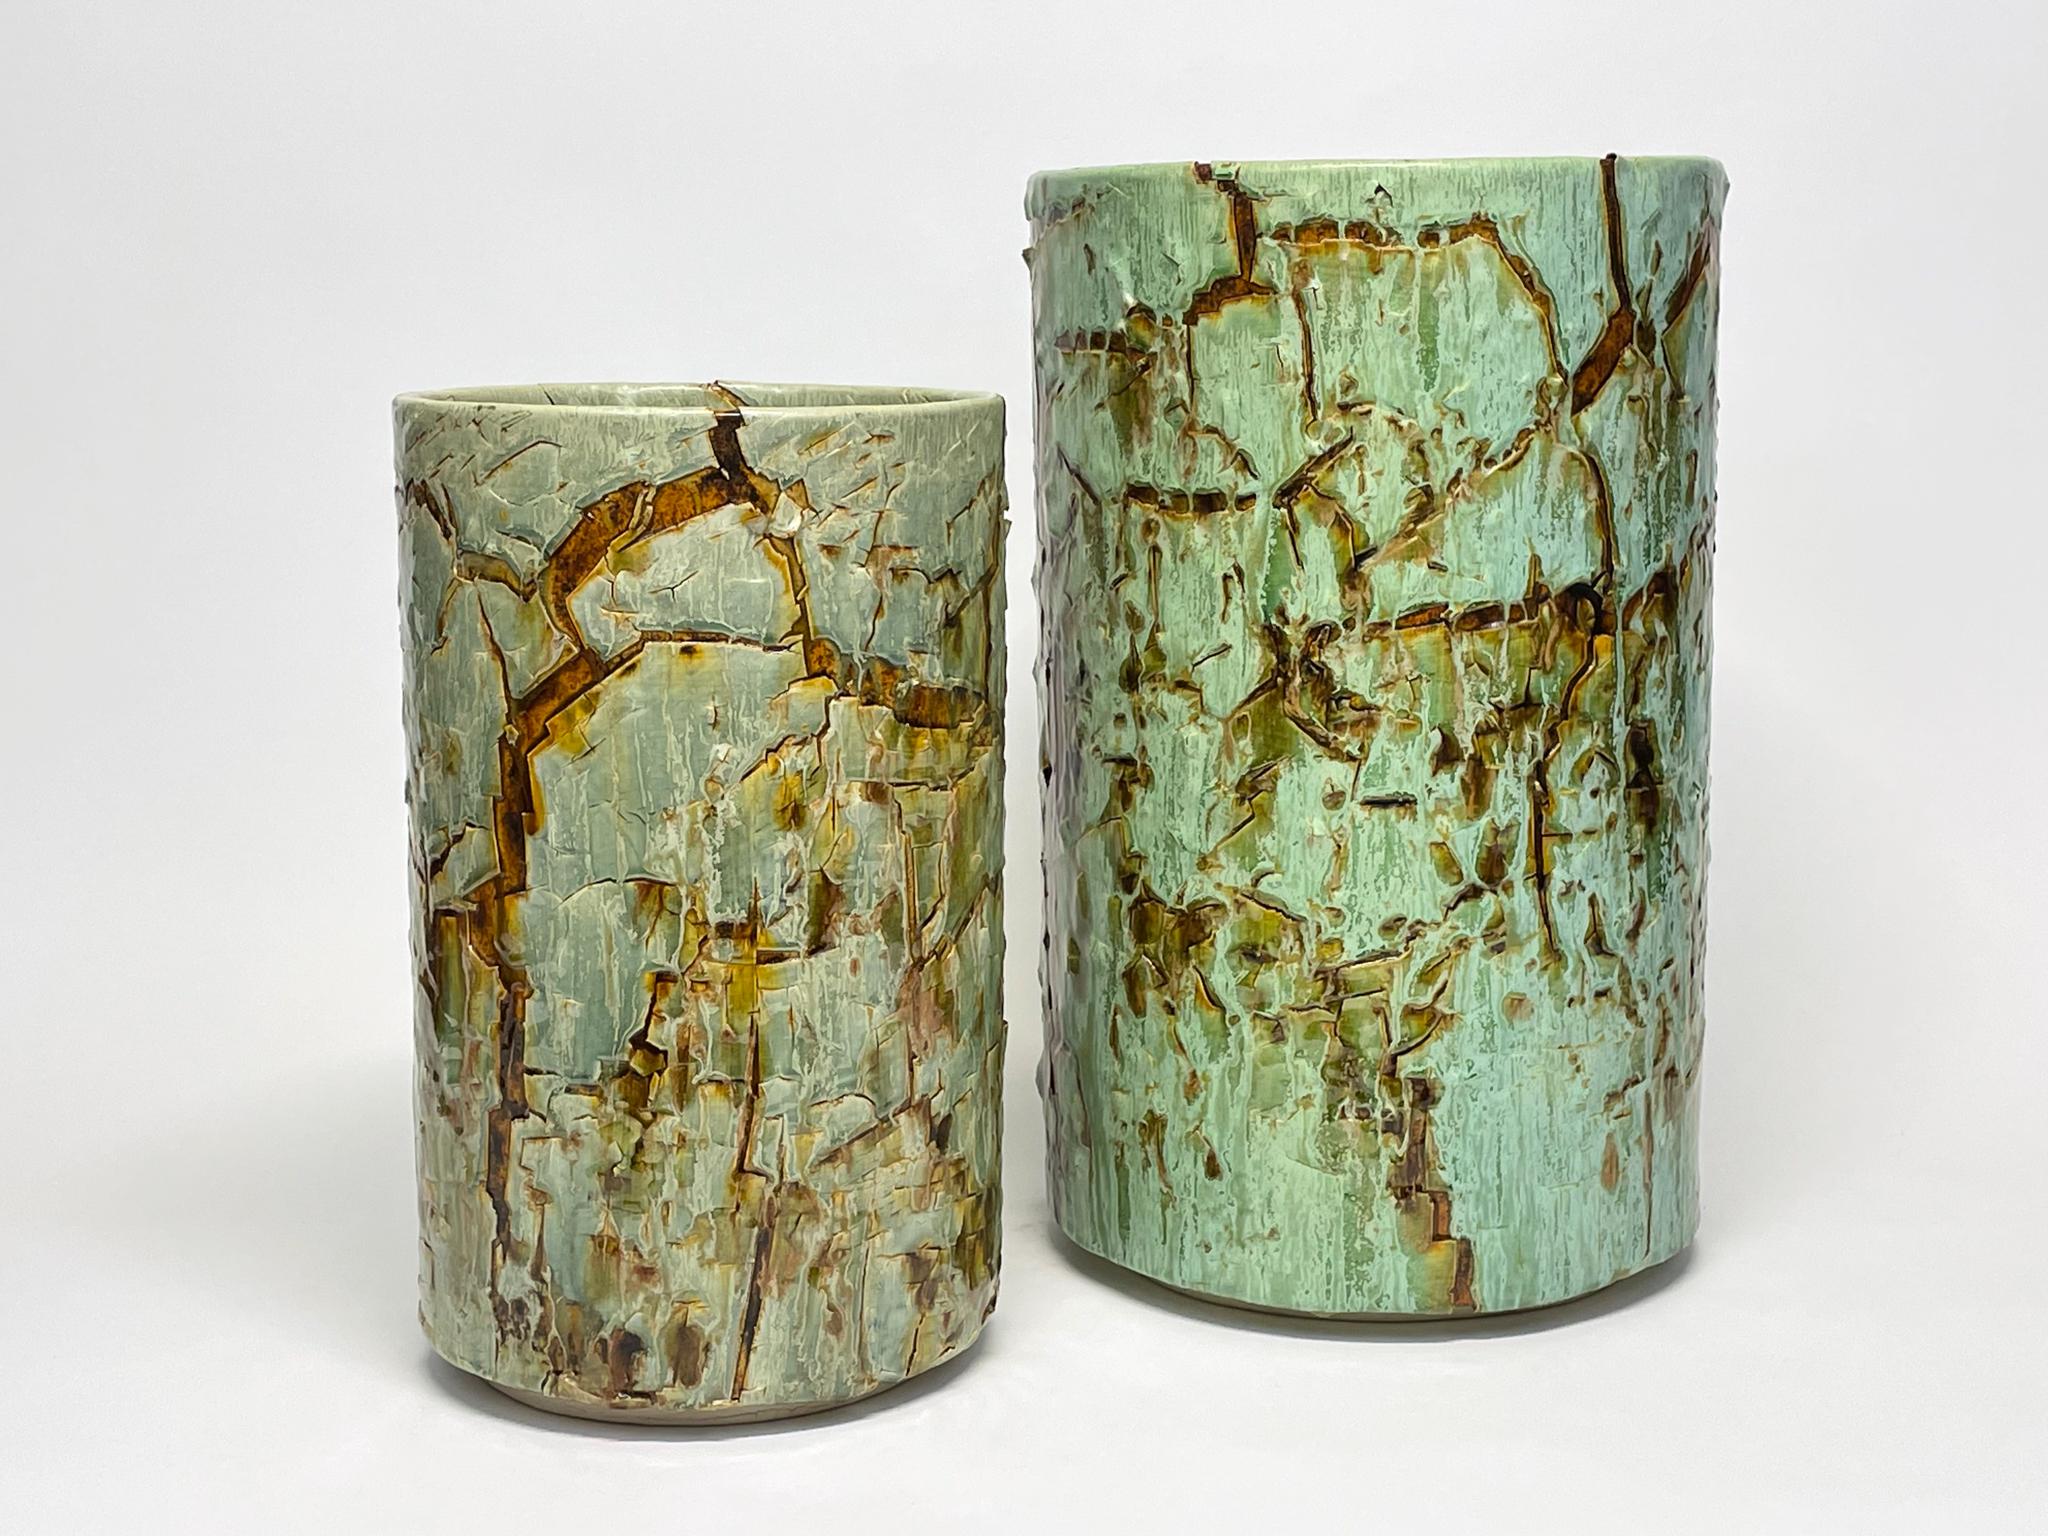 Contemporary Ceramic Vessel Cylinder Sculpture by William Edwards    For Sale